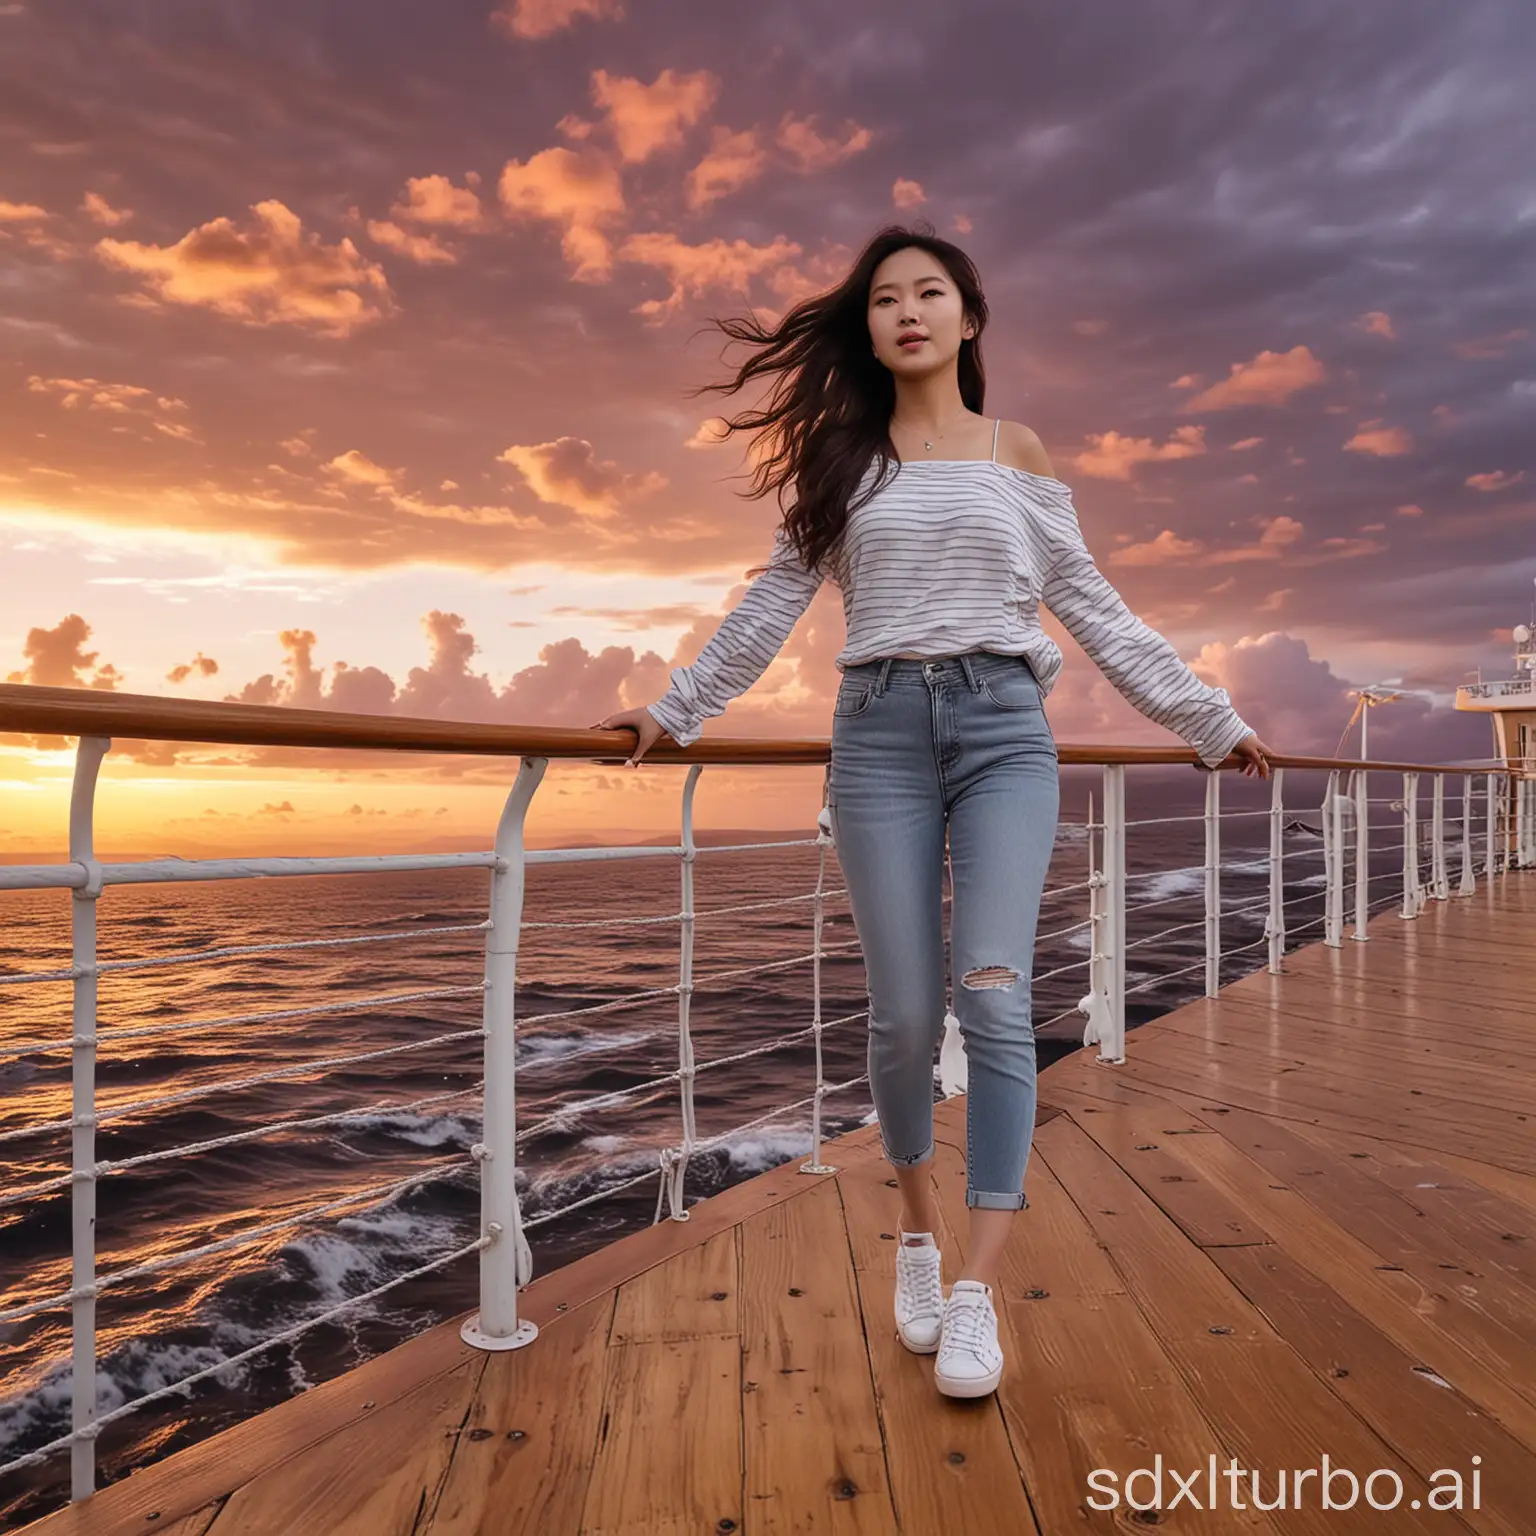 photo of a beautiful Korean woman with hair flowing in the wind standing on the deck of a ship with a beautiful sunset over the sea as a background. wearing a white striped top and gray jeans, as well as white shoes, standing with his hands against the wooden rail of the ship. The background is an orange and purple sky with thick clouds, and ocean waves that look calm and peaceful